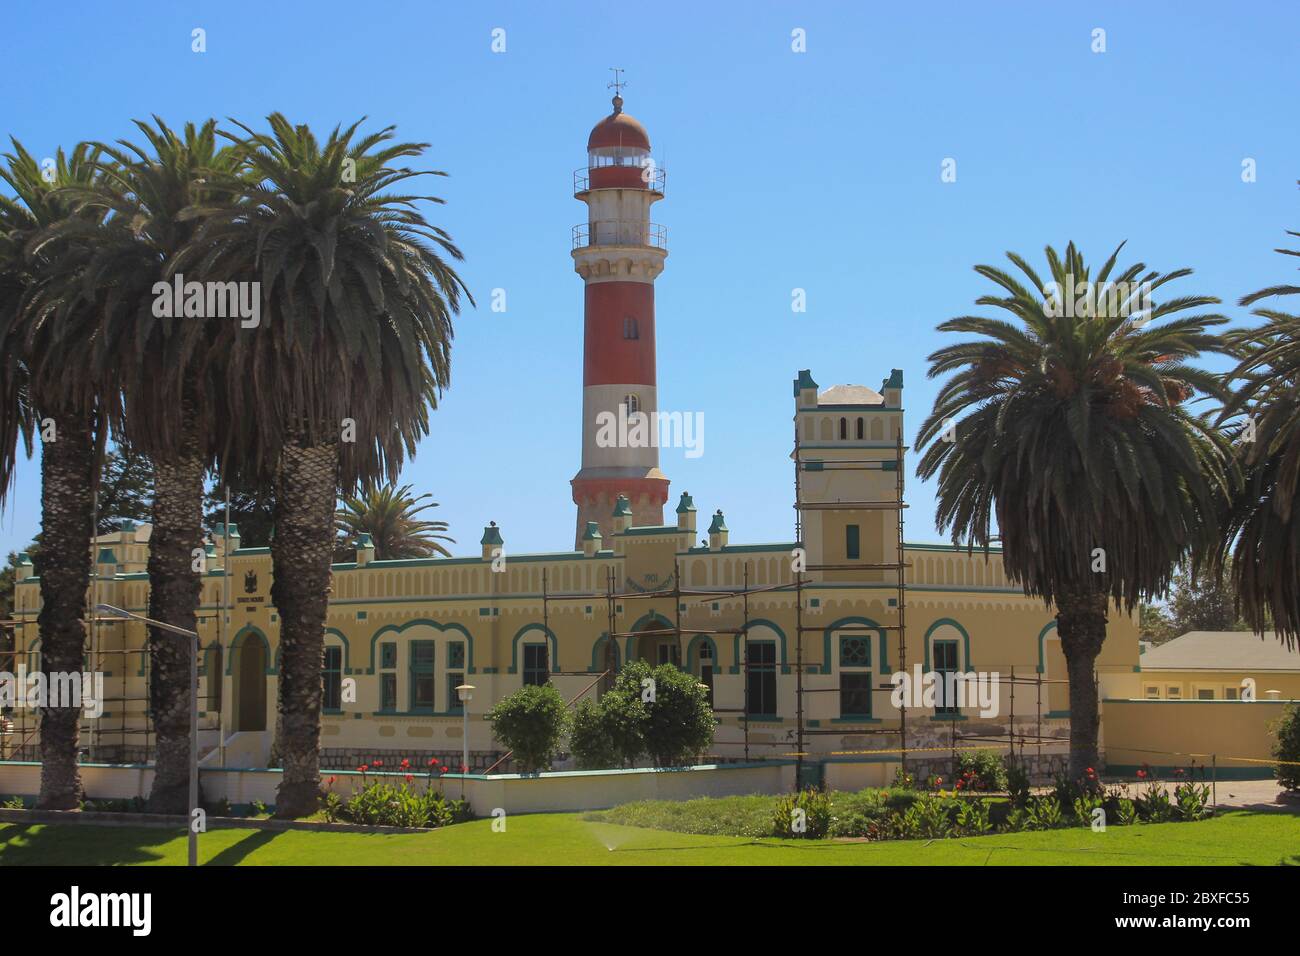 Swakopmund, Namibia - April 18, 2015: Old German red and white lighthouse, which is called "bacon" surrounded by palm trees Stock Photo